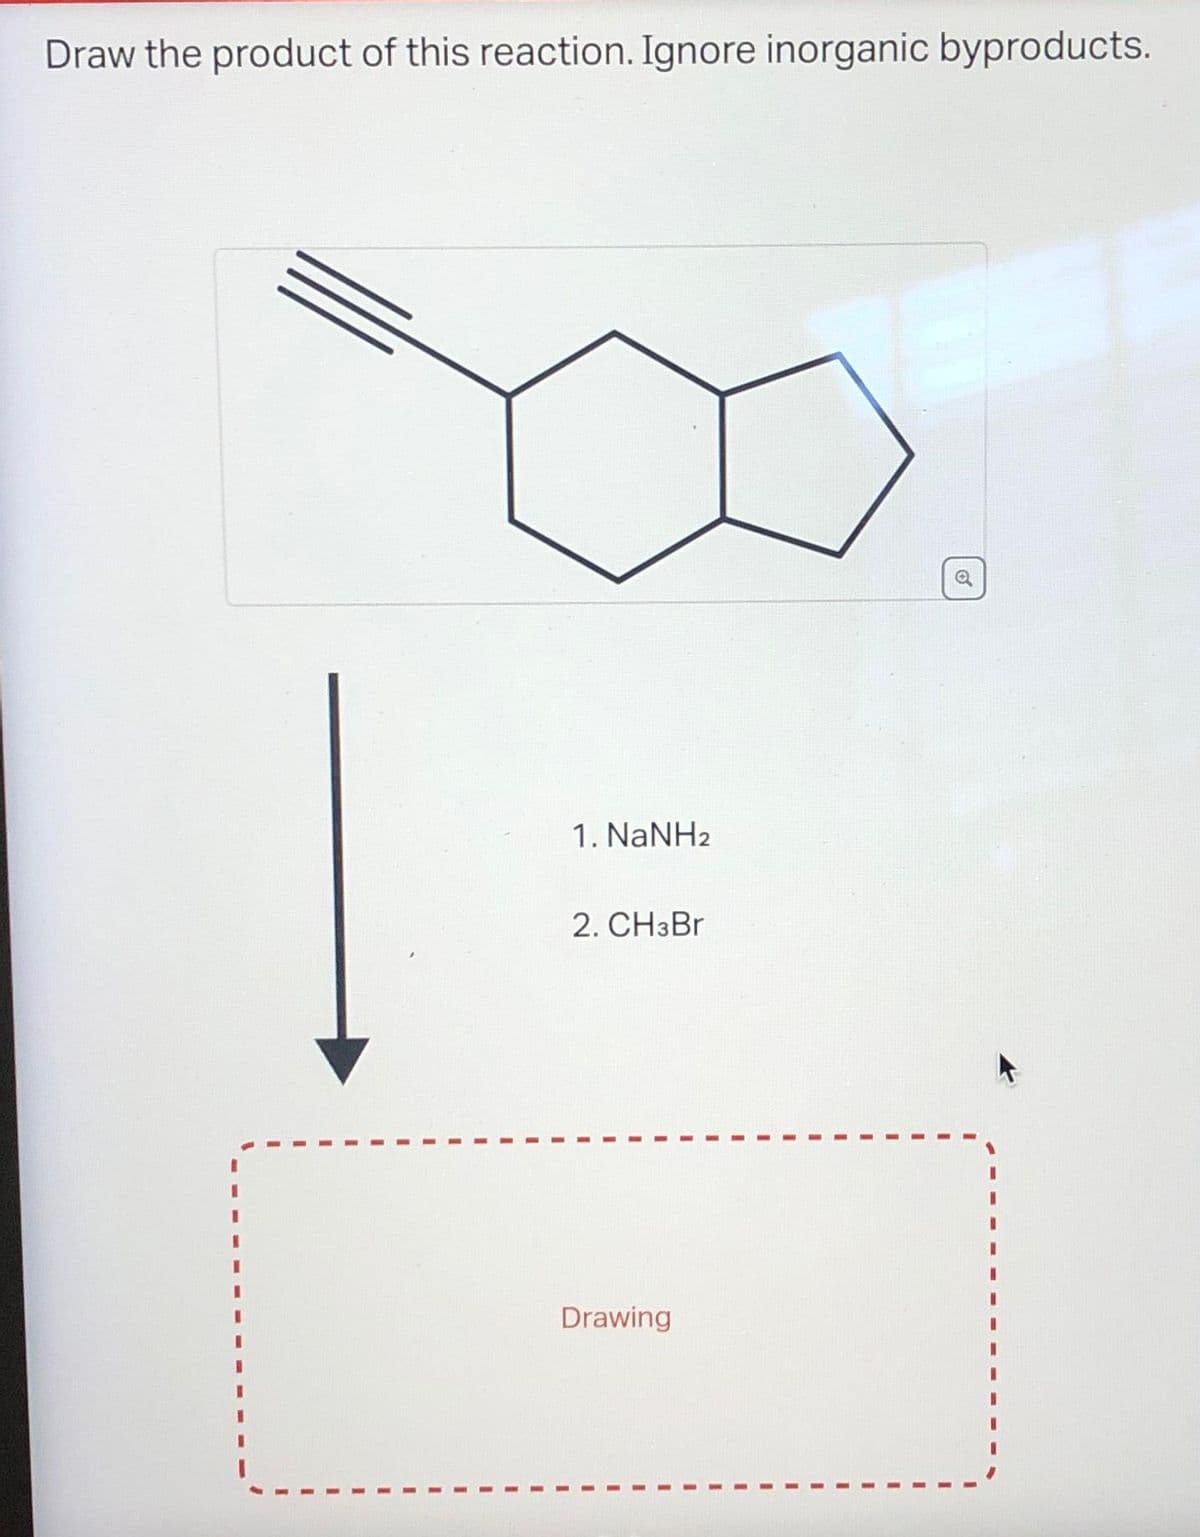 Draw the product of this reaction. Ignore inorganic byproducts.
1. NaNH2
2. CH3Br
Drawing